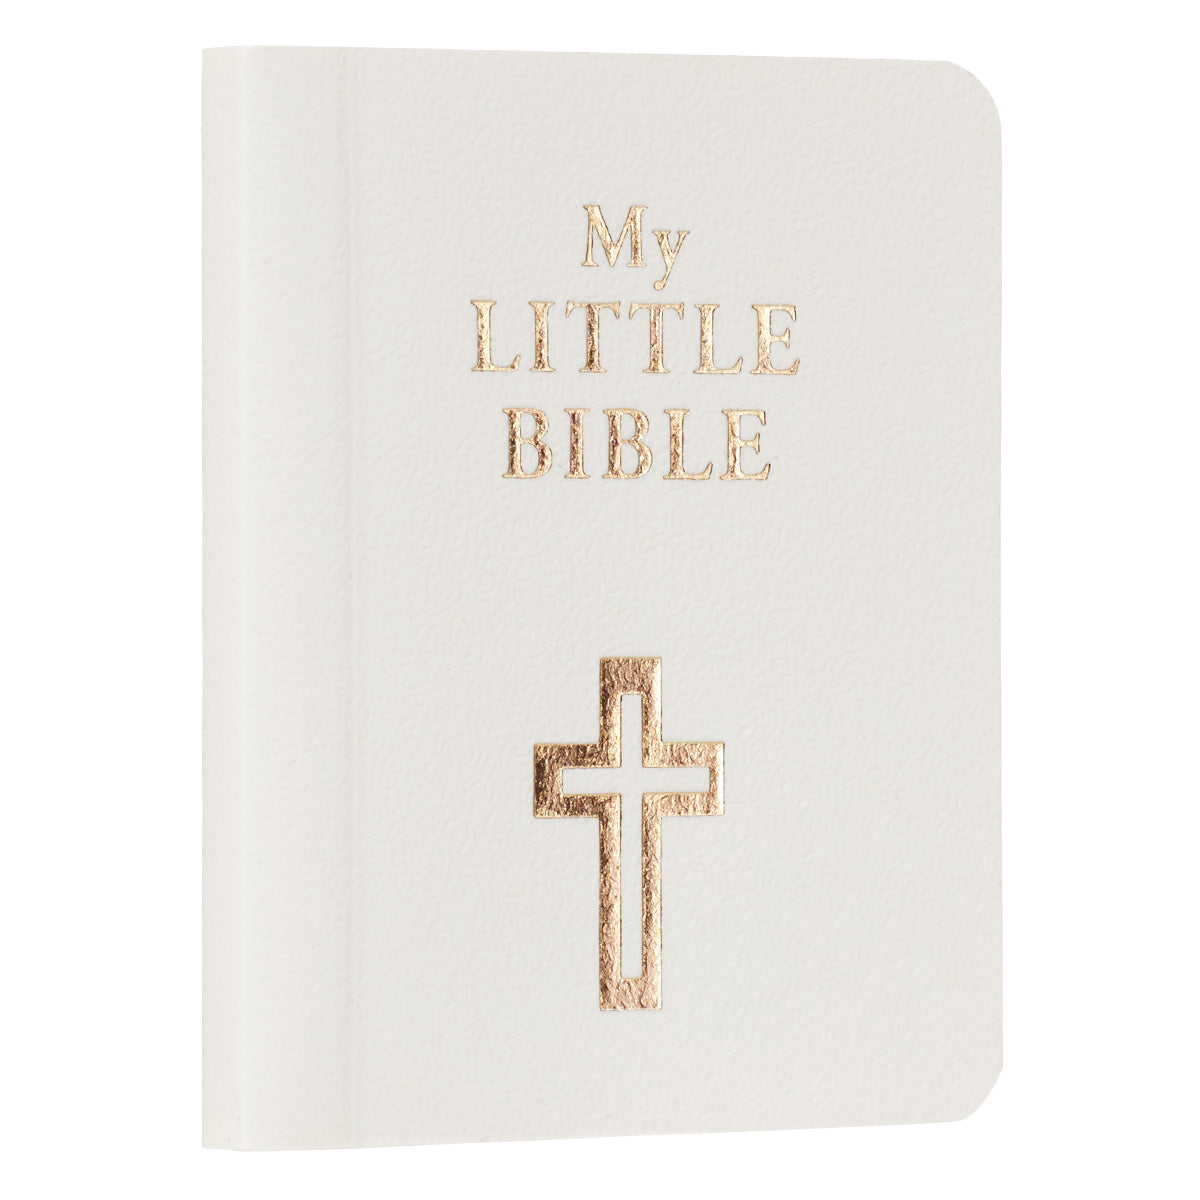 My Little Bible White - The Christian Gift Company